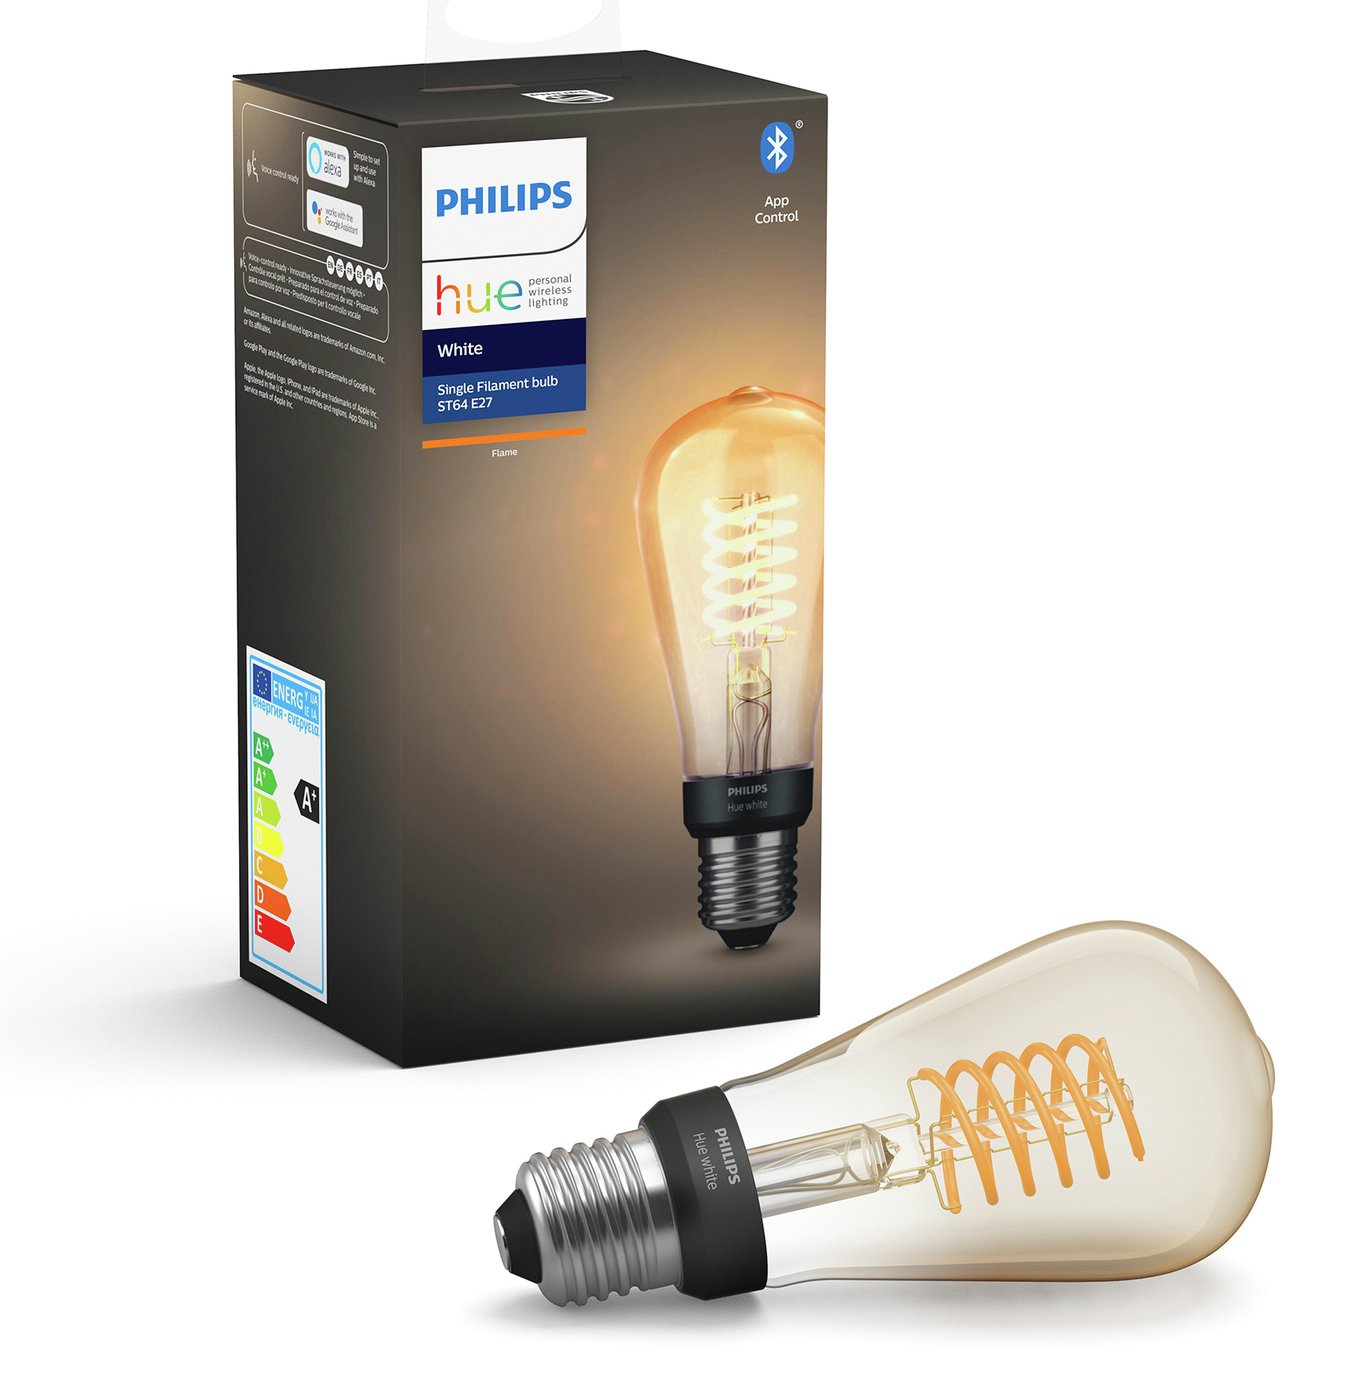 Philips Hue ST64 White Smart Filament Bulb with Bluetooth Review